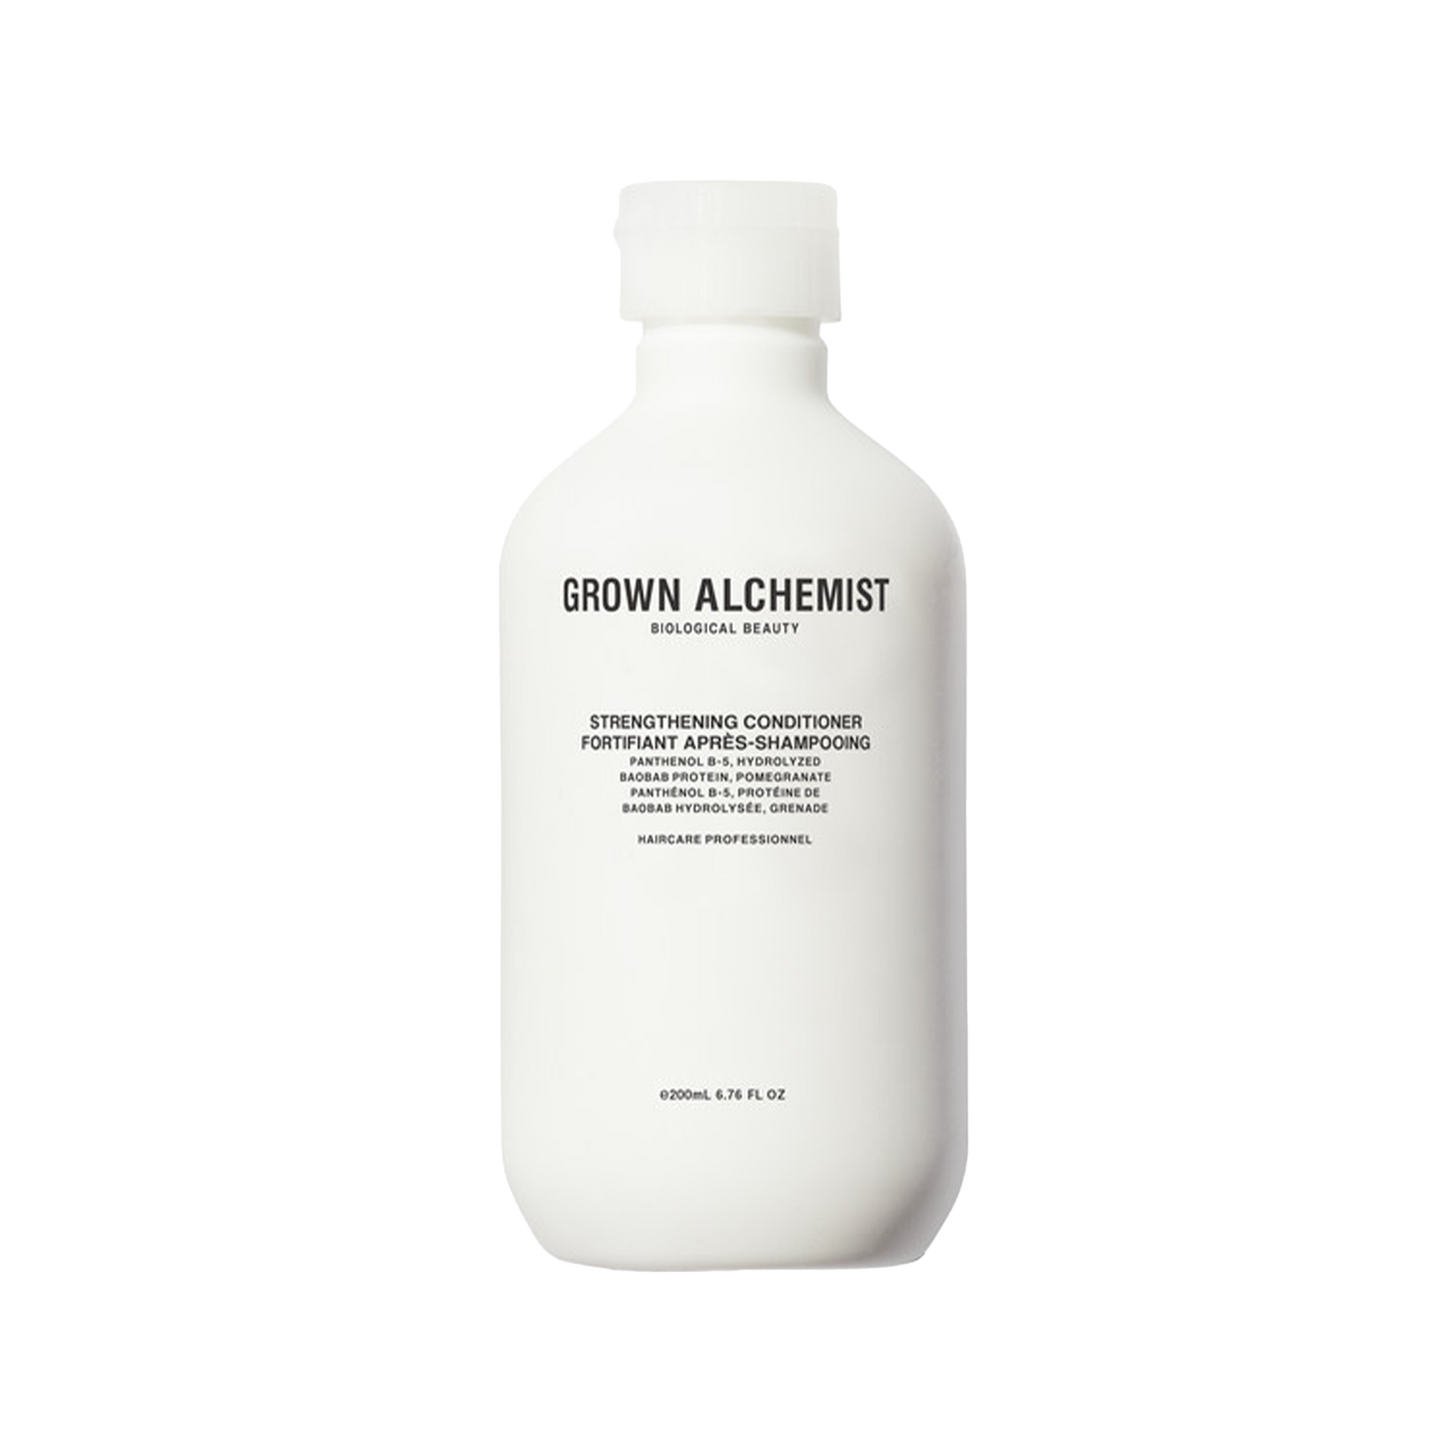 Grown Alchemist Strengthening - Conditioner 0.2: An advanced formulation that thoroughly helps repair hair weakened by chemical processes, heat-styling and environmental exposure, leaving hair looking healthy, hydrated, soft and shiny.